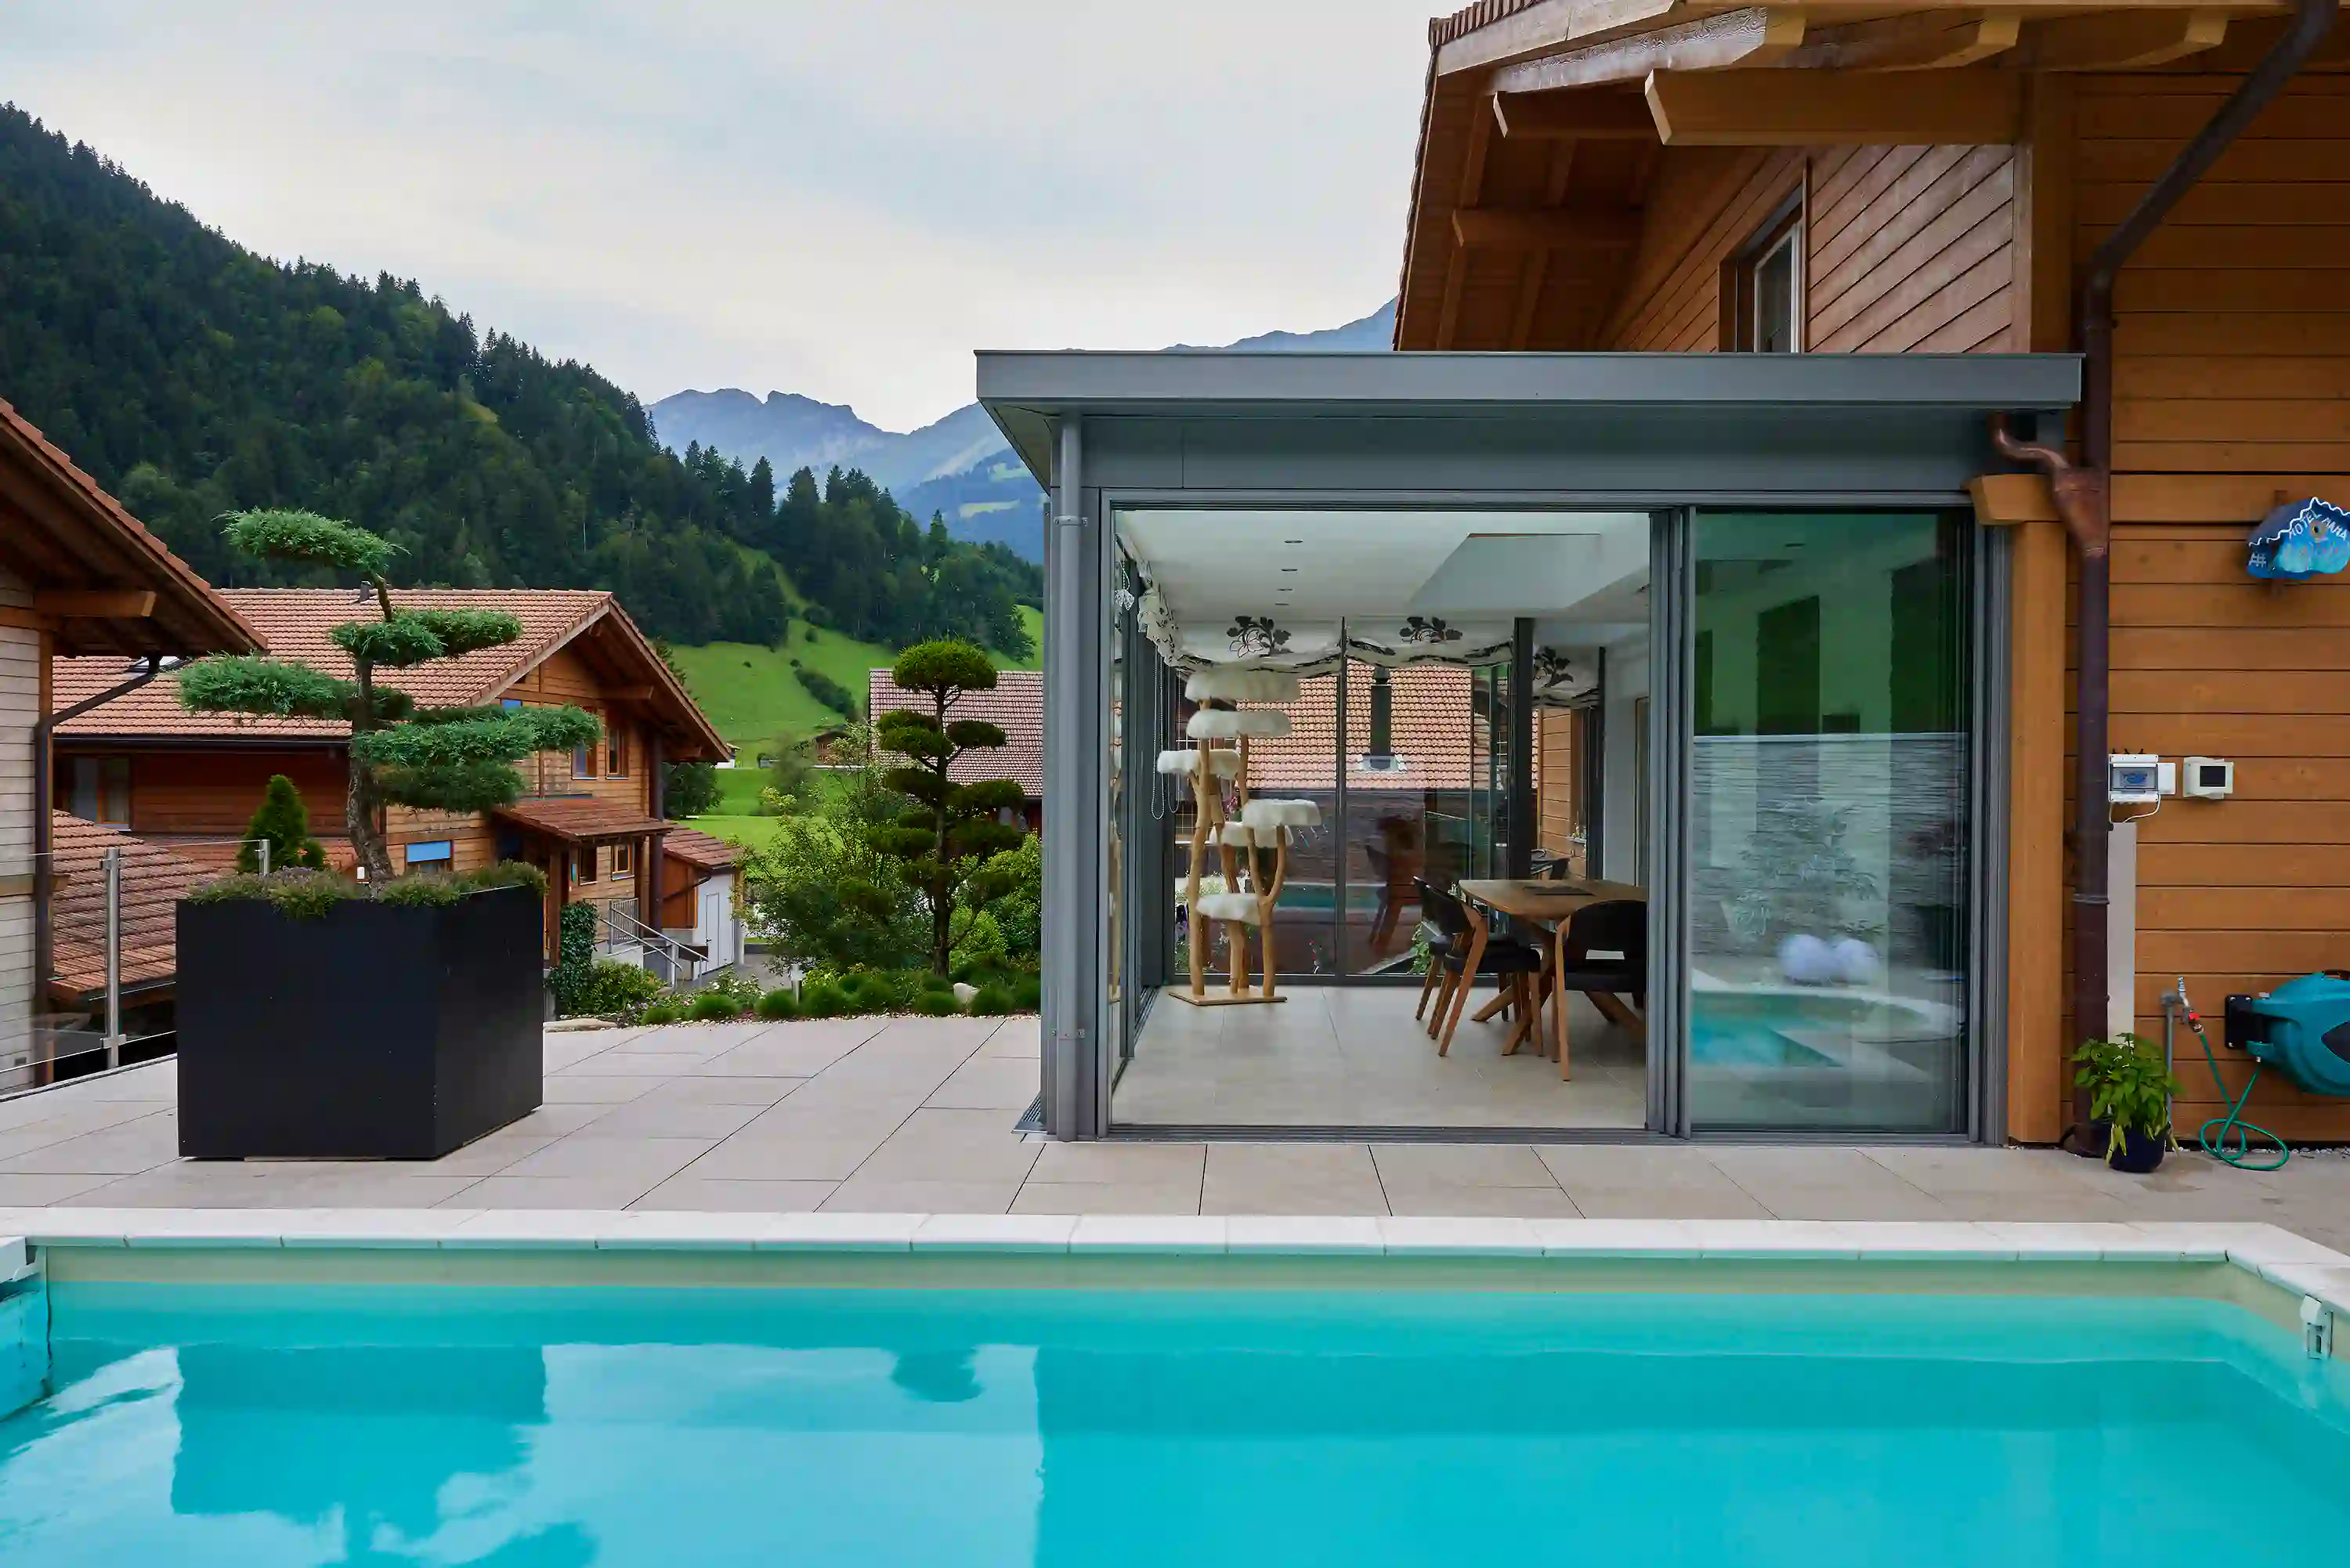 Image of a conservatory in Switzerland